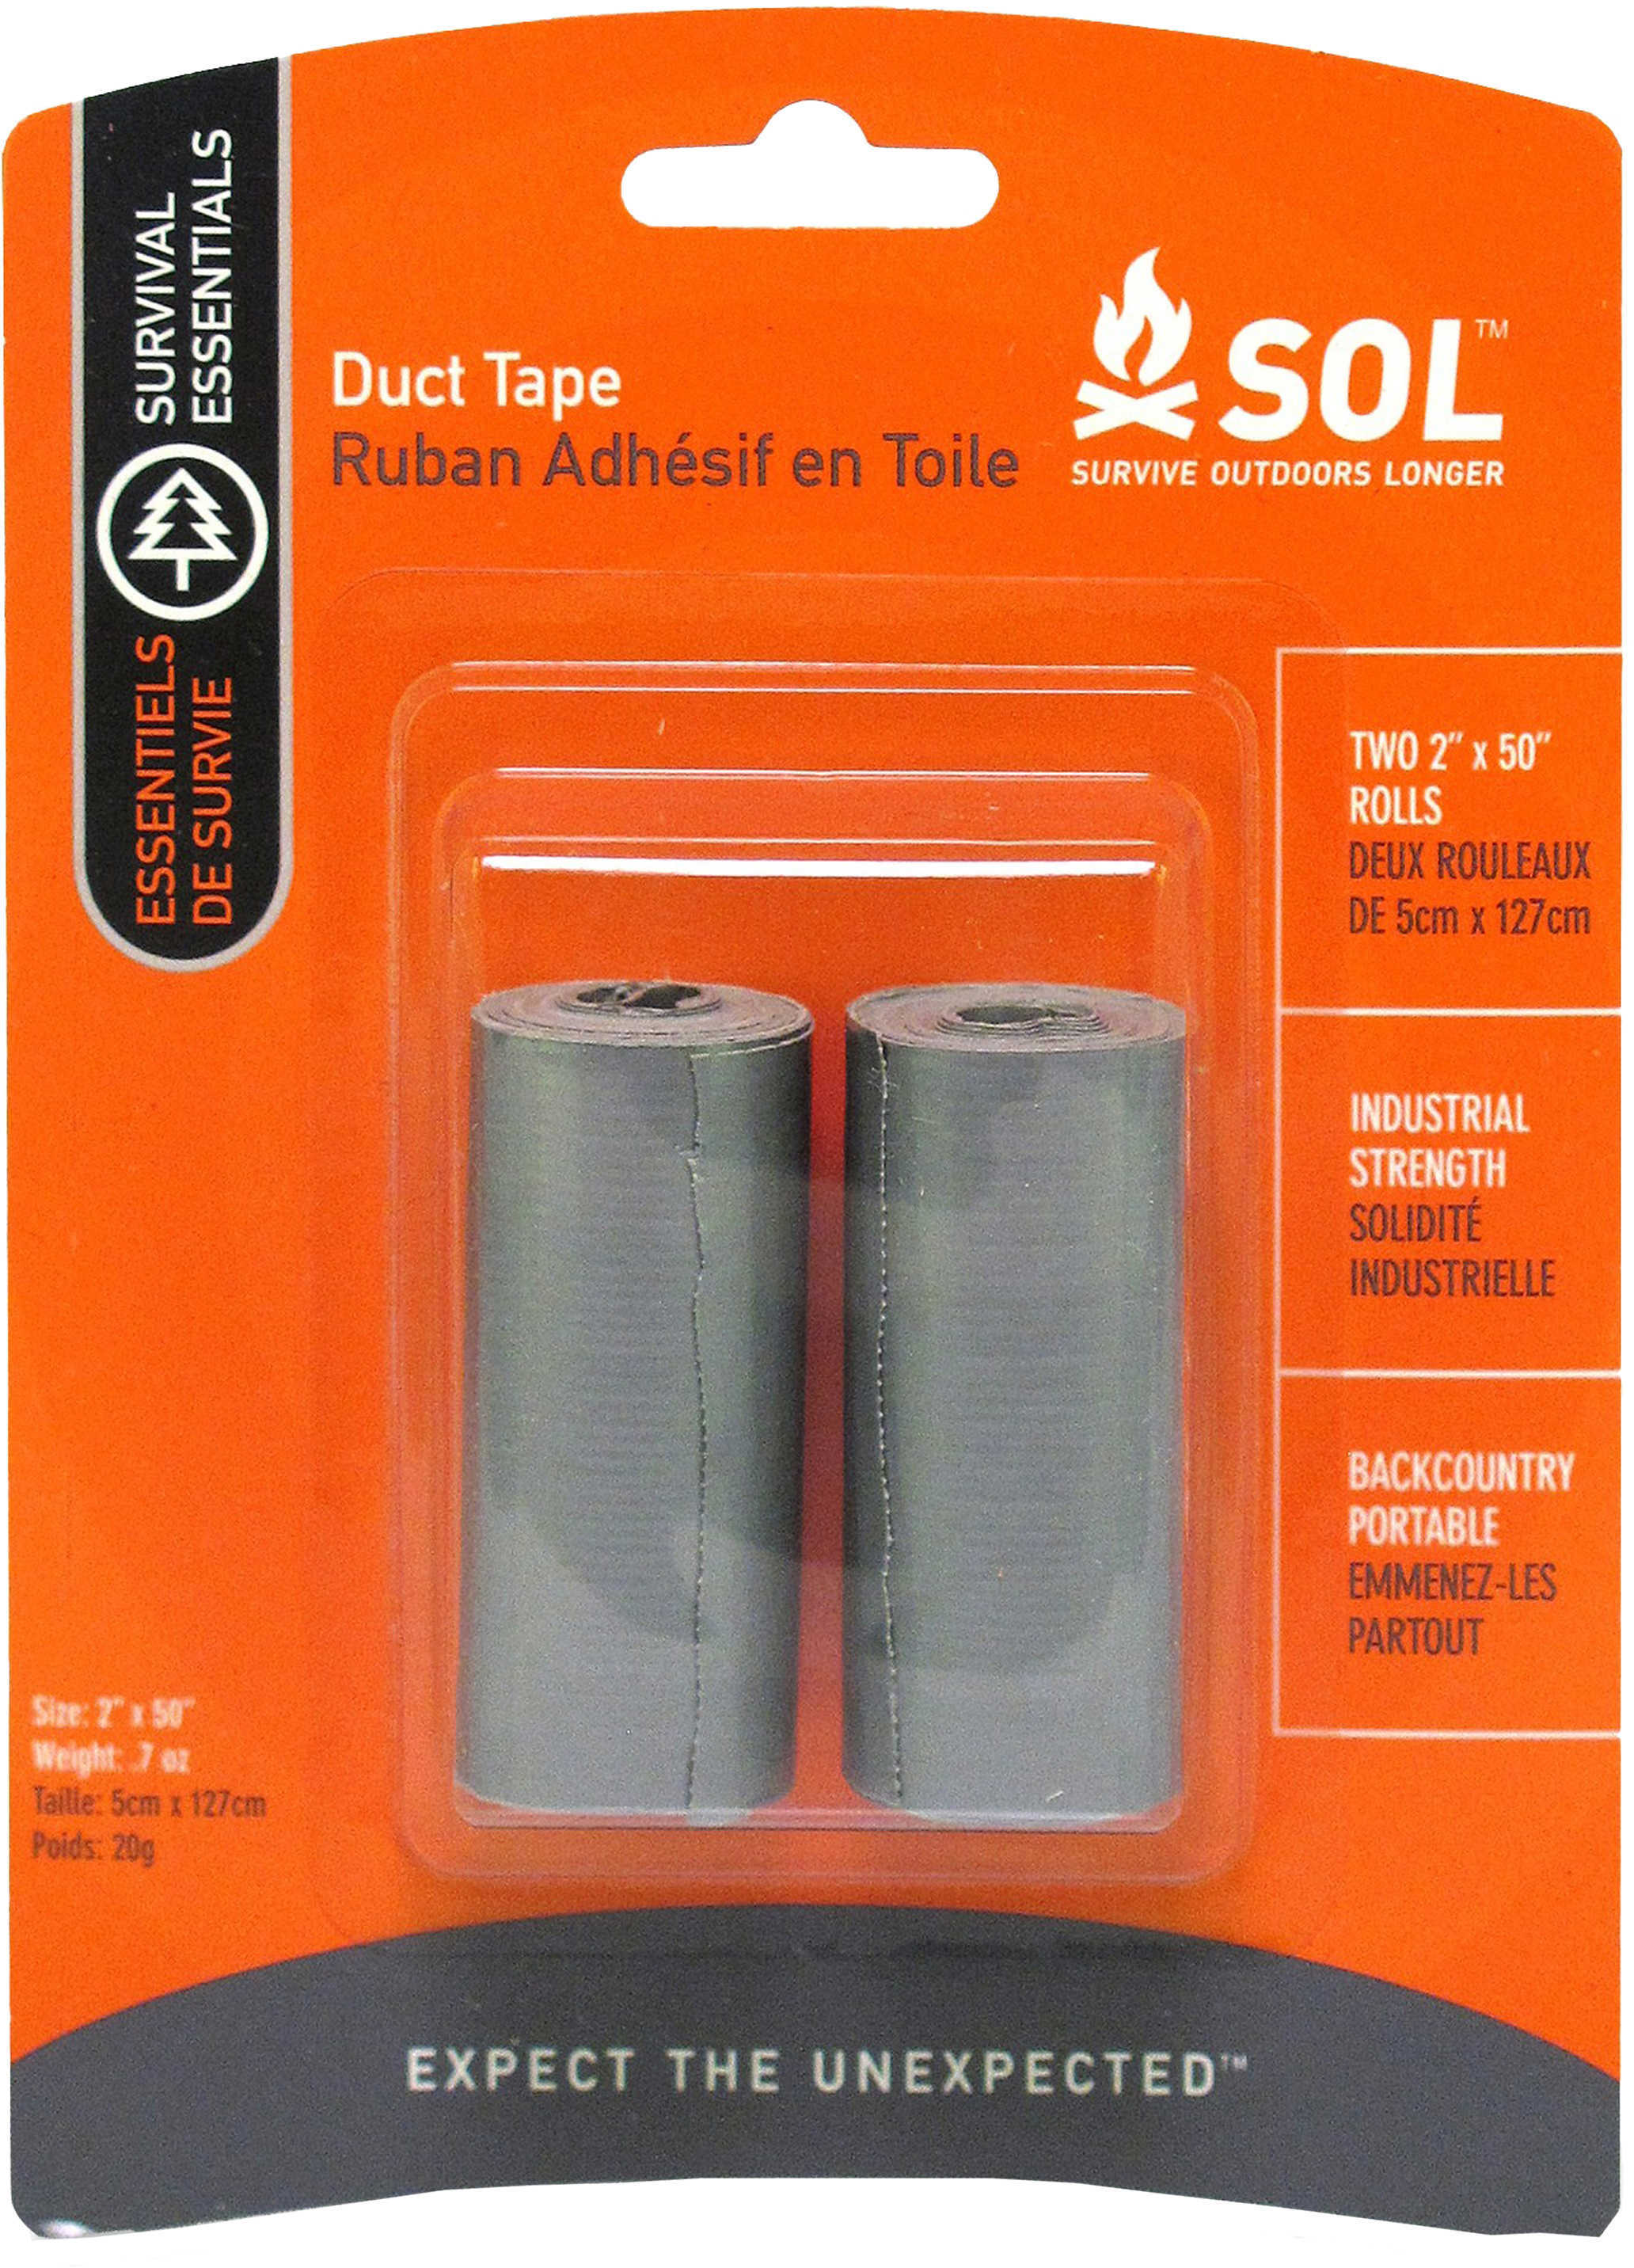 Survive Outdoors Longer / Tender Corp AMK Sol Duct Tape 2 Pack 2"X50" ROLLS-img-1